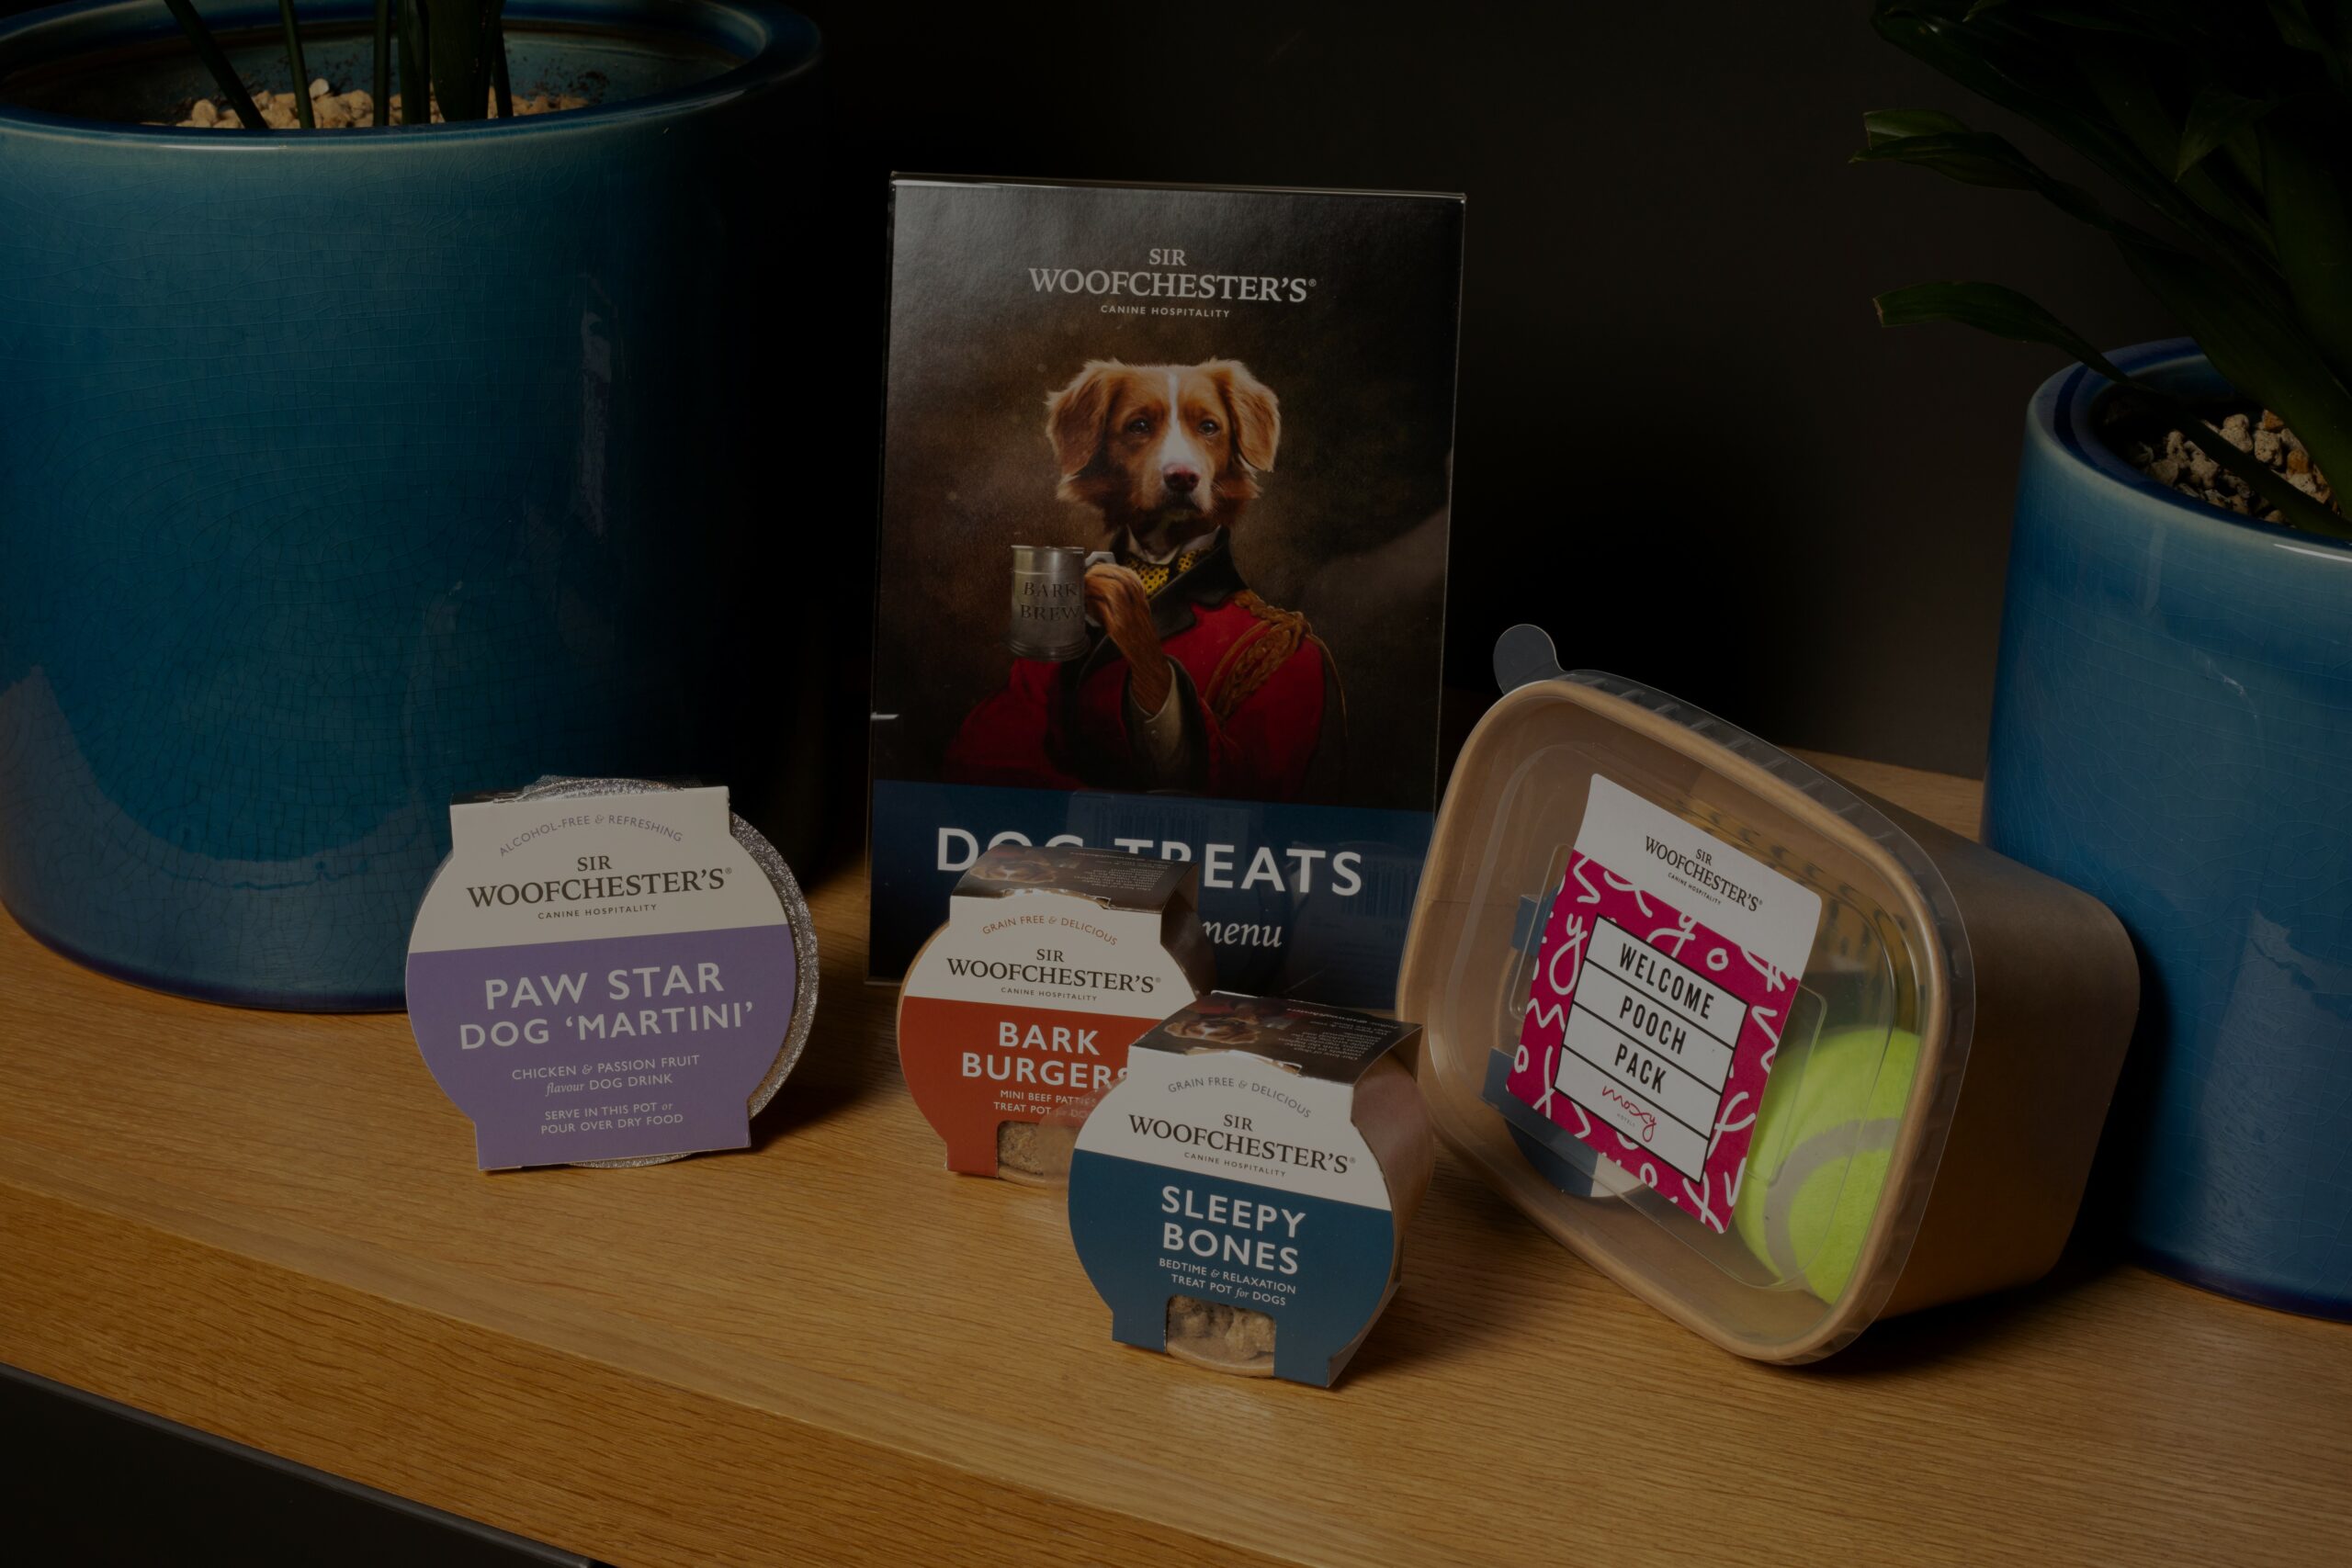 MOXY HOTELS GO BARKING MAD FOR NEW ENHANCED DOG-FRIENDLY PACKAGES